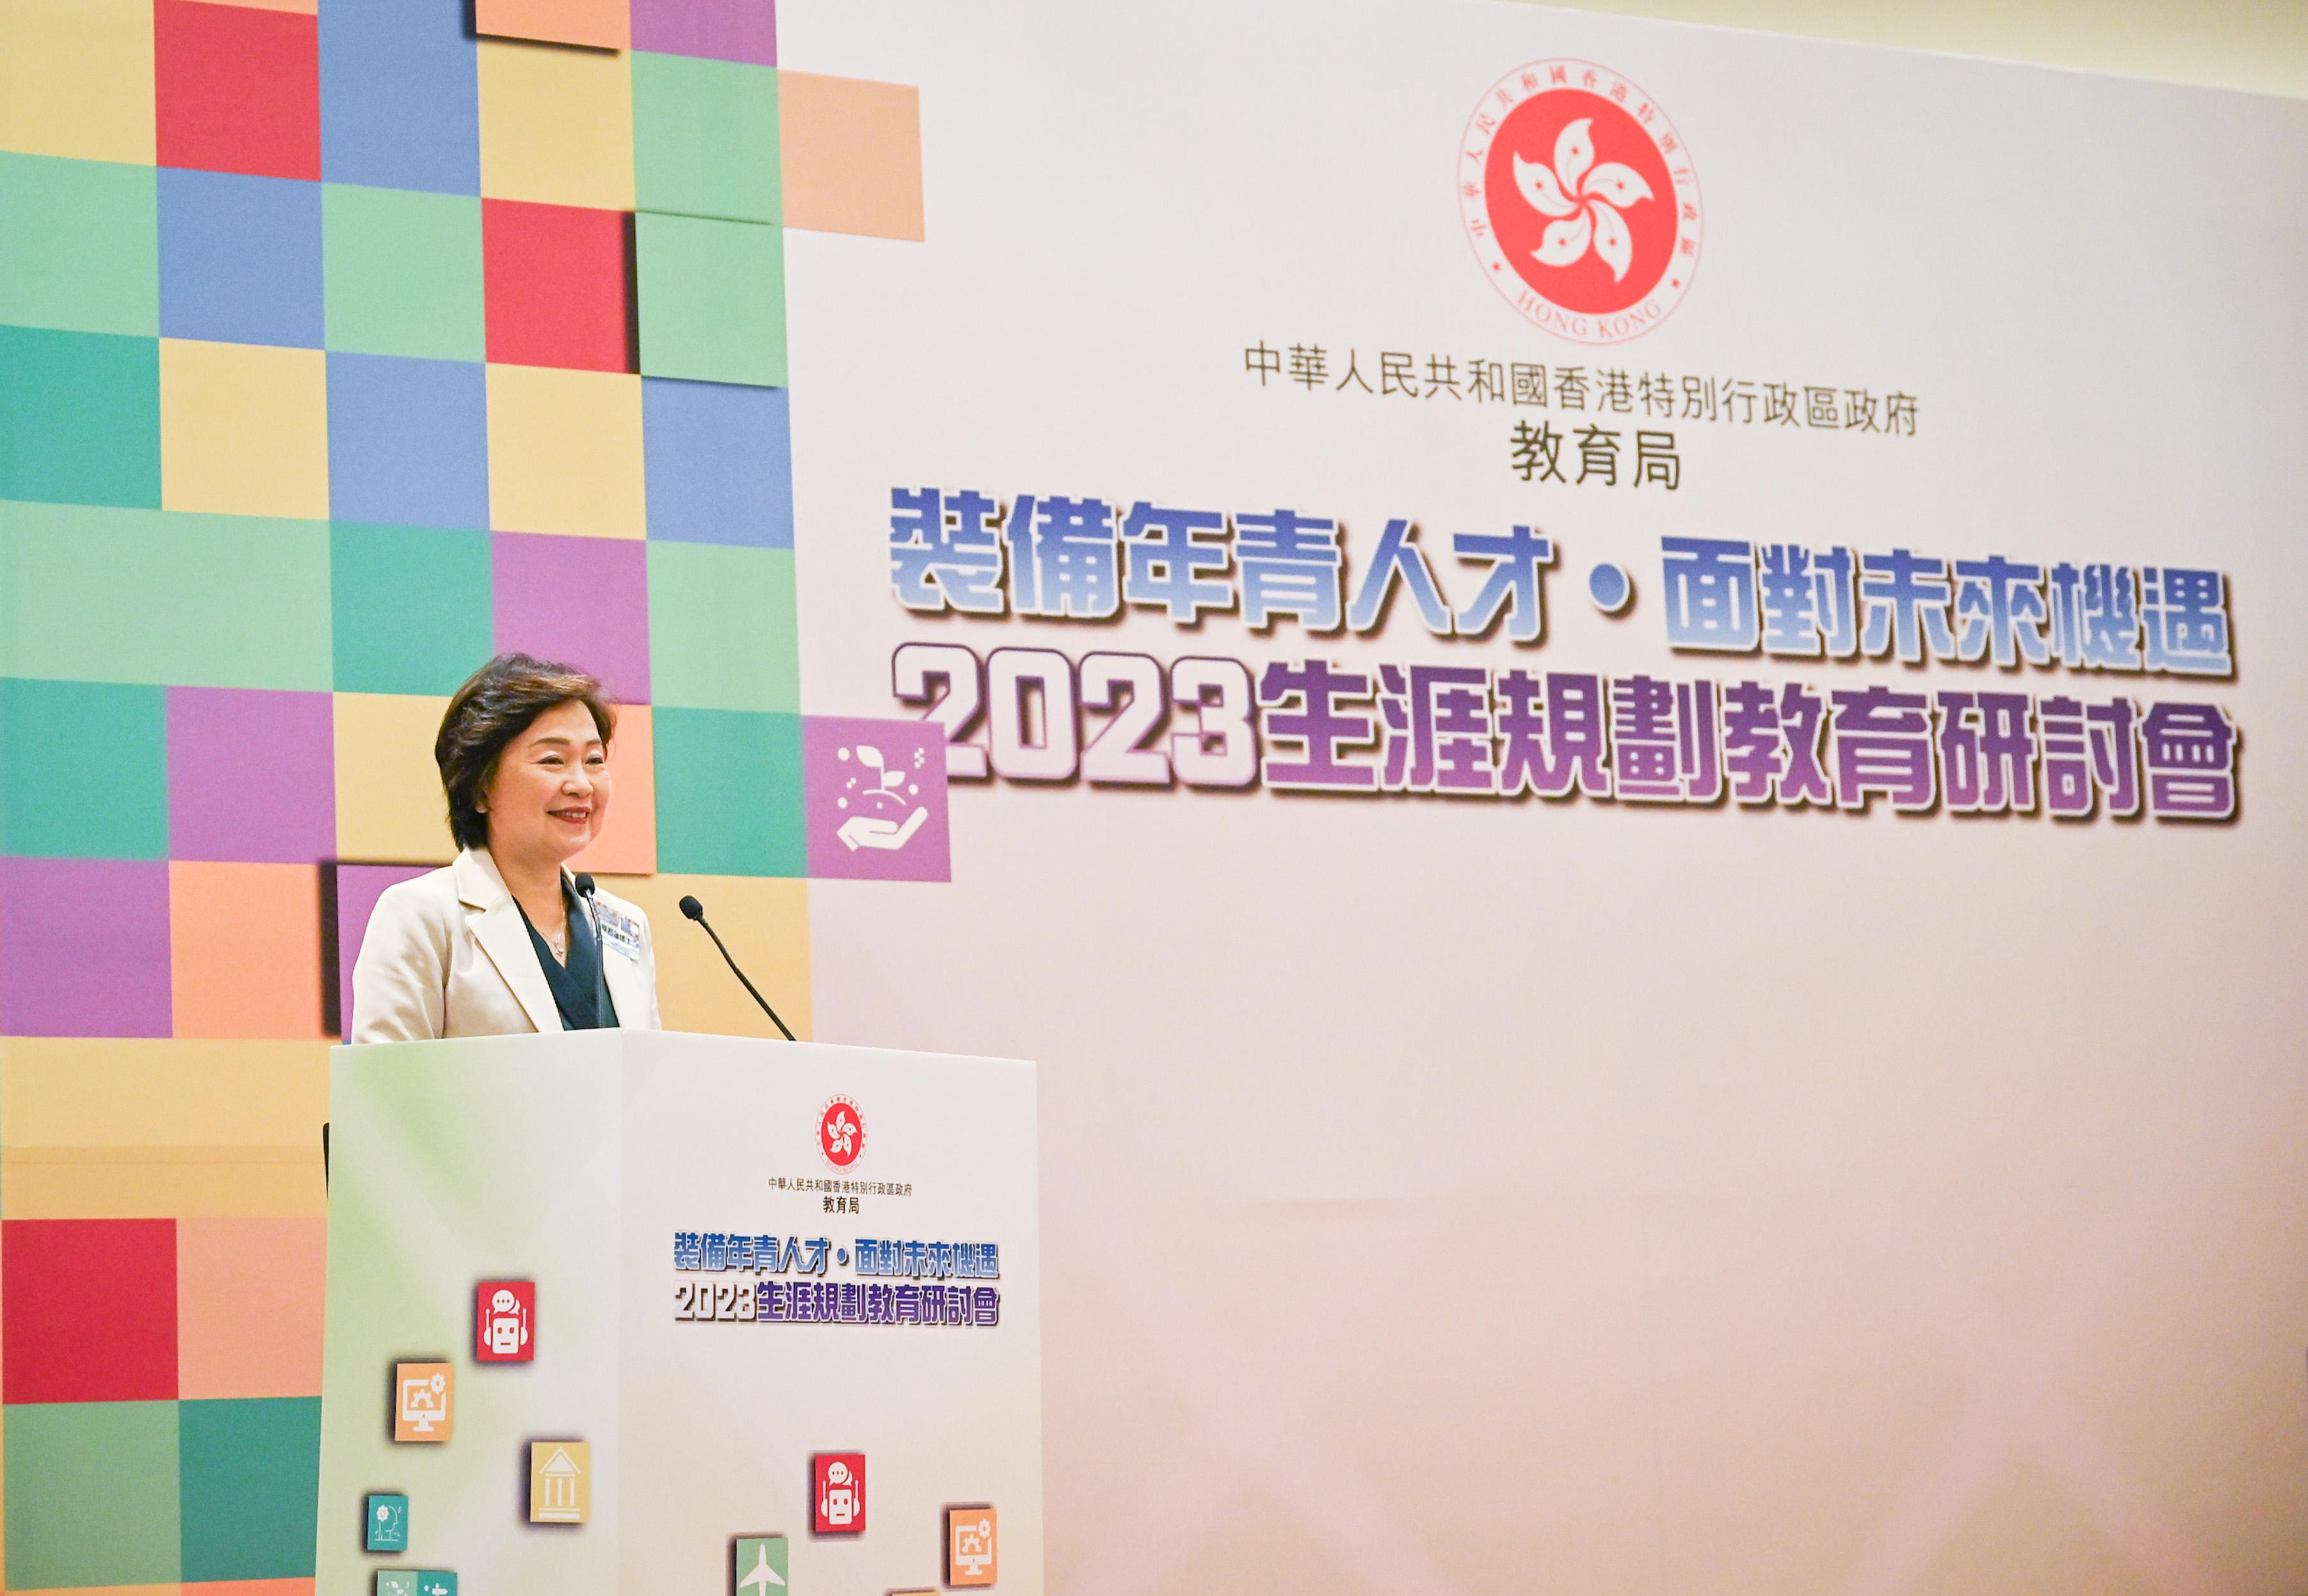 The Secretary for Education, Dr Choi Yuk-lin, speaks at the Life Planning Education Conference themed on "Equipping Young Talents - Welcoming Future Opportunities" organised by the Education Bureau today (November 10).